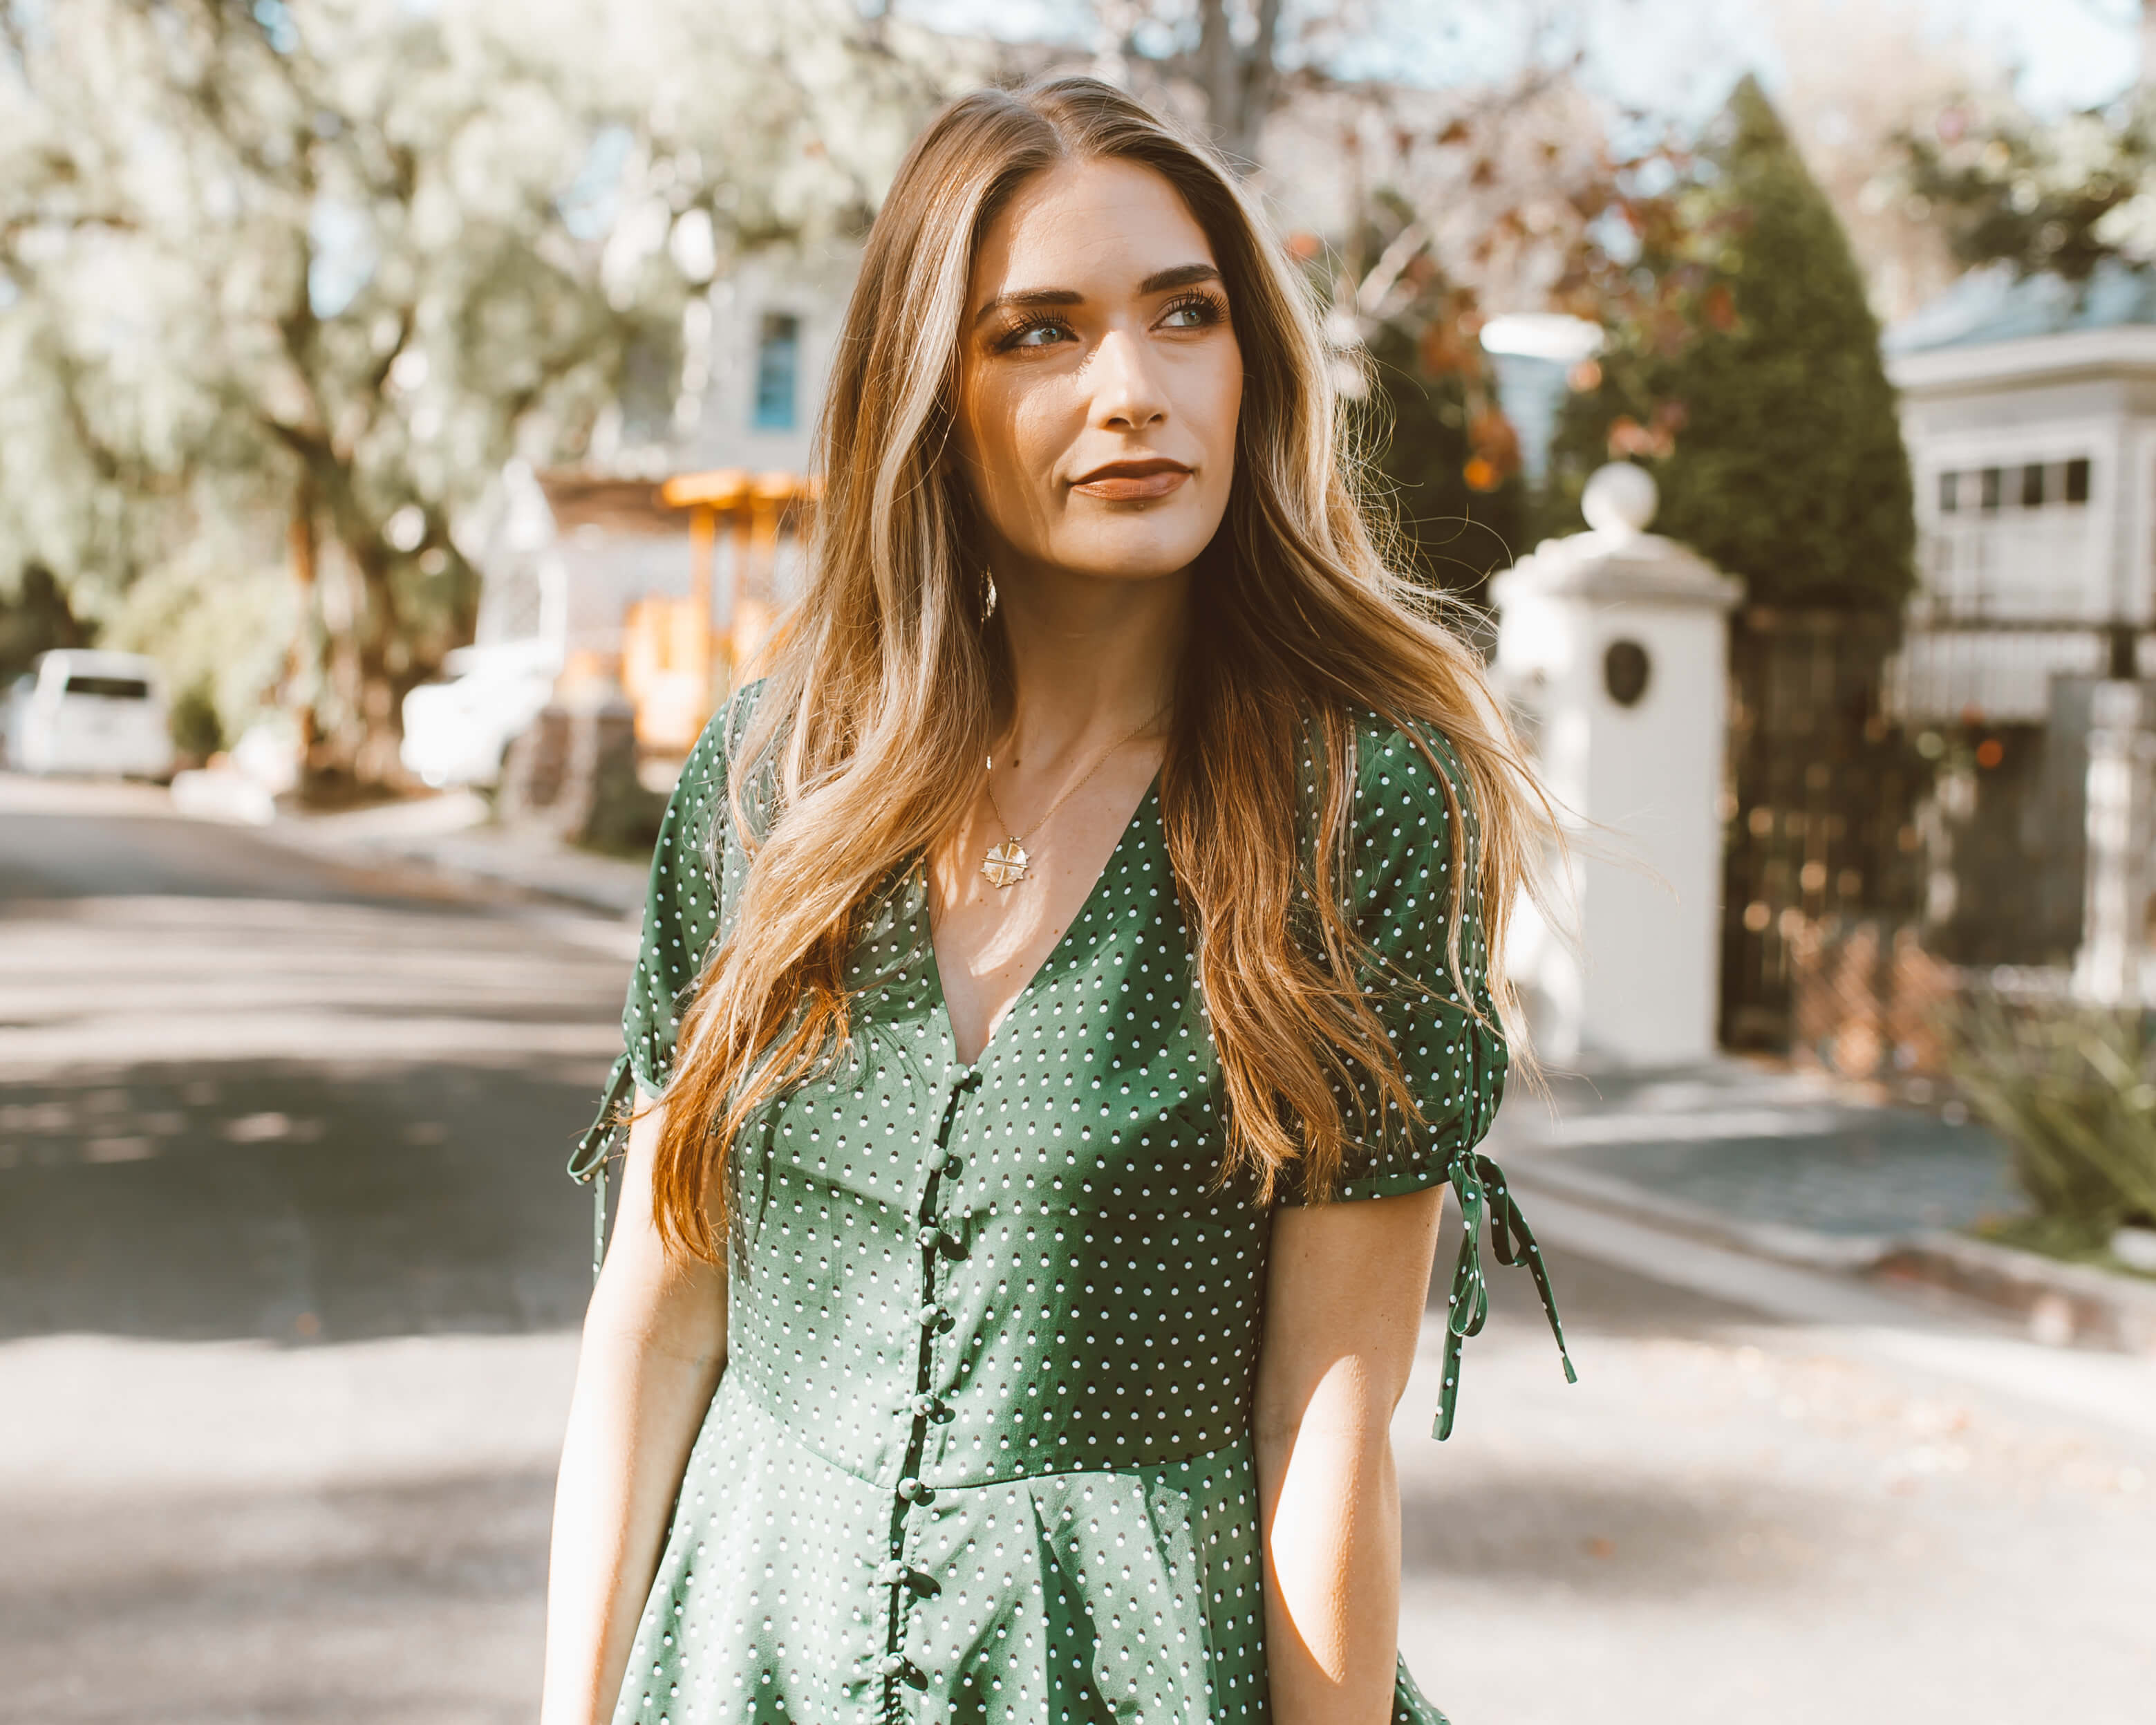 Is Green the Color for Spring? | Twinspiration